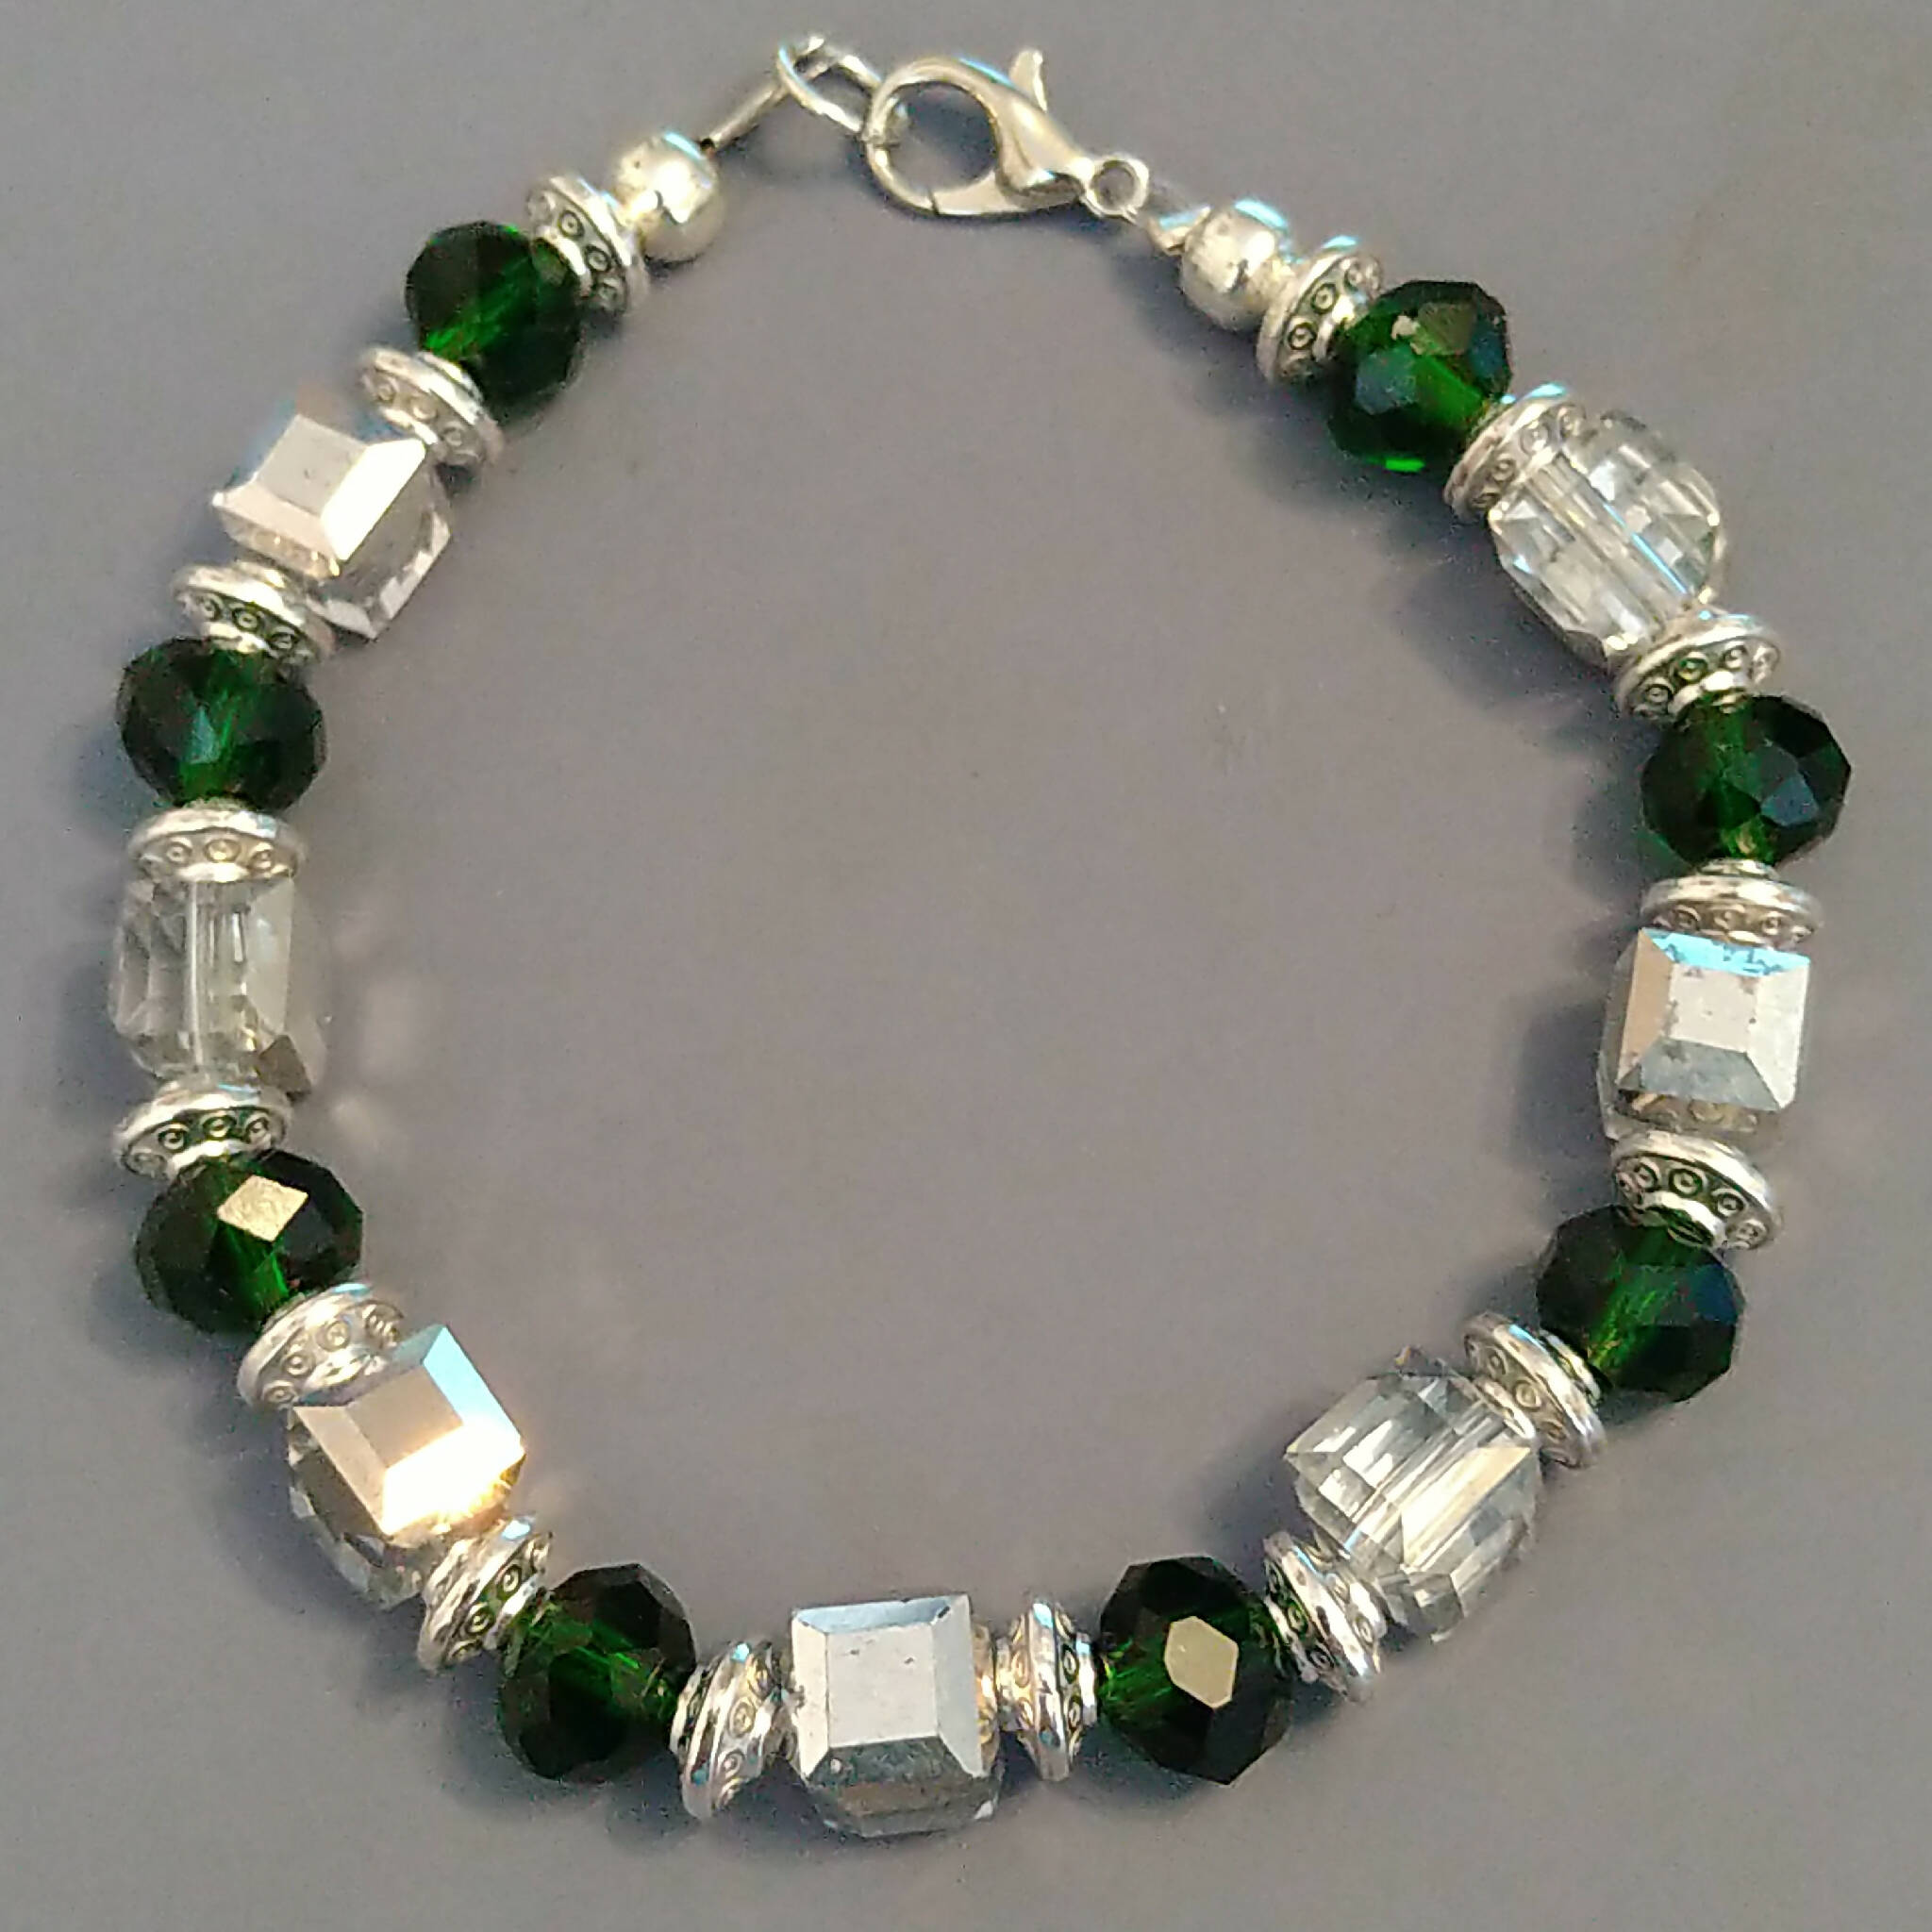 Green & Silver coloured bracelet, handmade using recycled beads. 18cm length, but an extender chain can be added upon request.